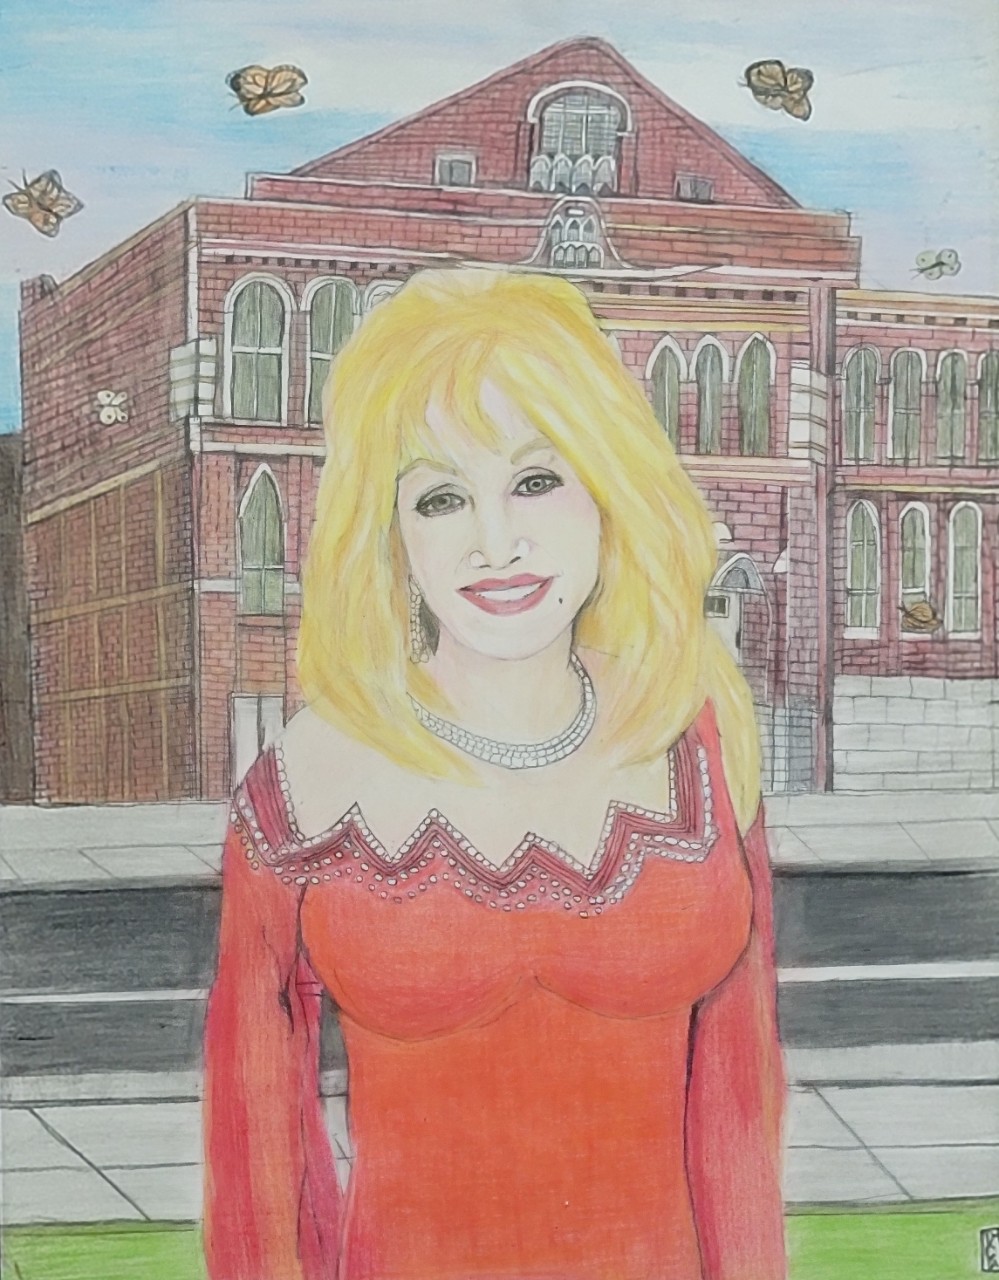 a detailed colored pencil sketch of Dolly Parton standing in front of the Ryman Auditorium wearing a red dress and surrounded by a few butterflies.